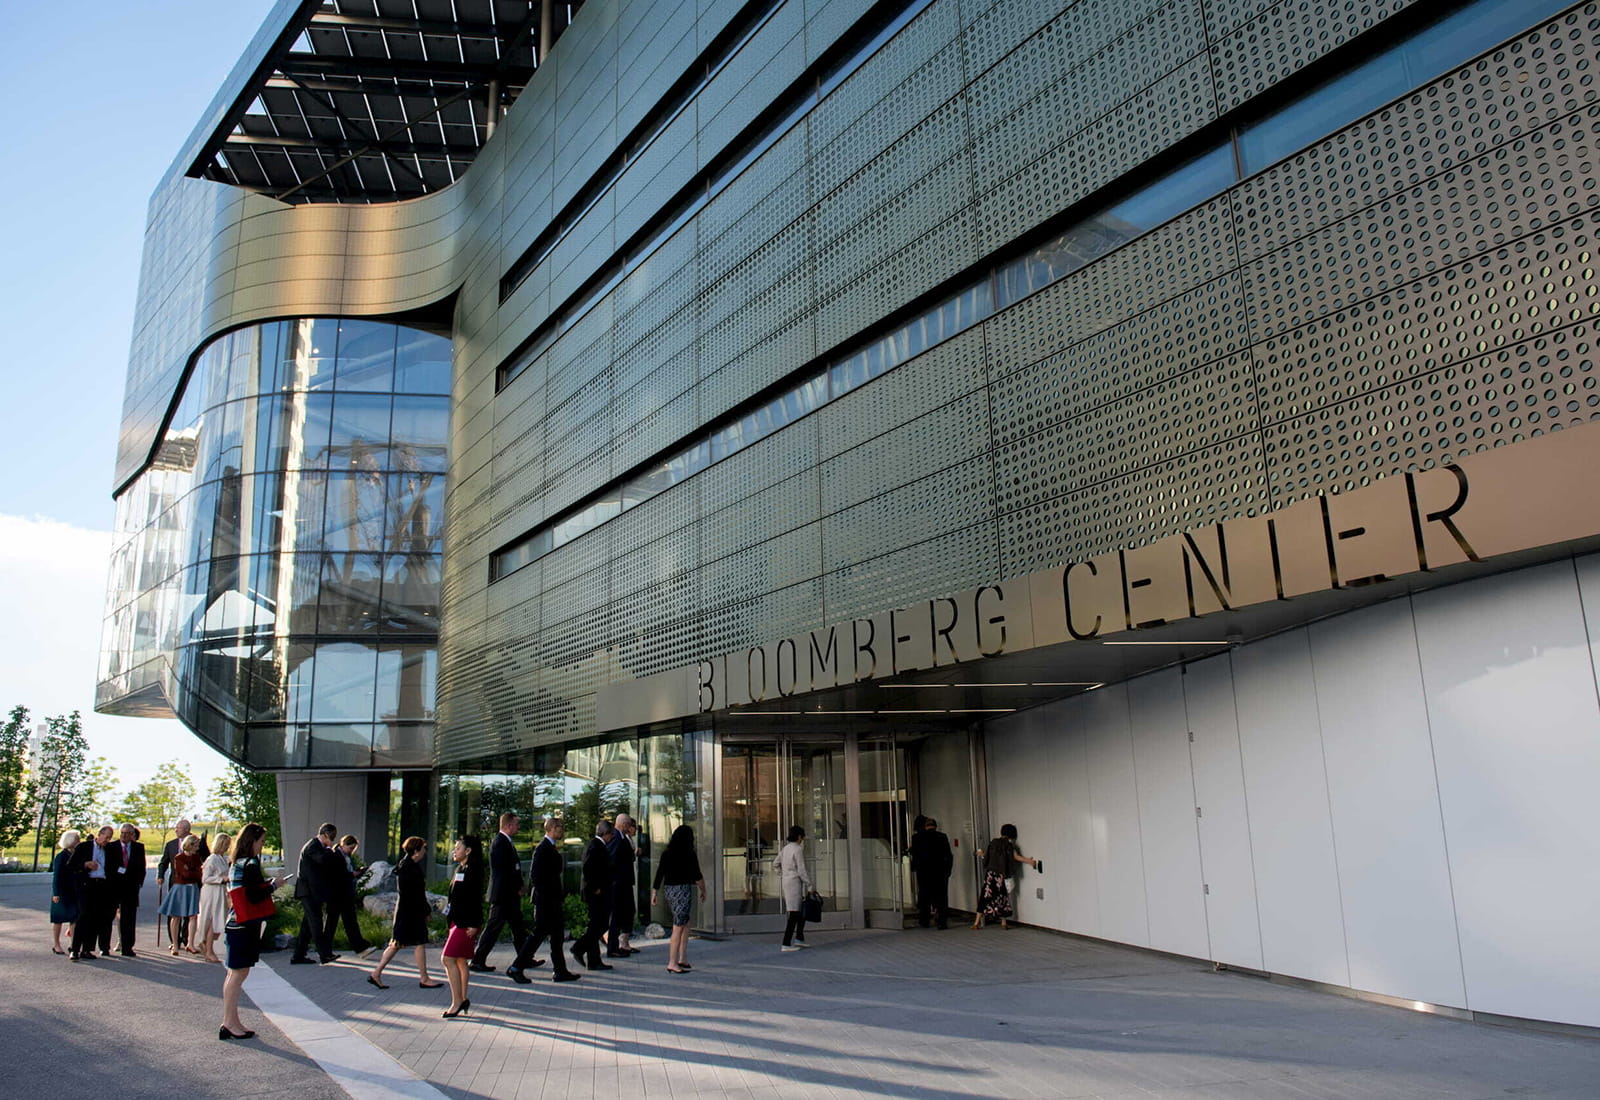 The Bloomberg Center at Cornell Tech, named in honor of Emma and Georgina Bloomberg, serves as a campus hub to bring students and faculty together to collaborate across disciplines on New York City's Roosevelt Island.